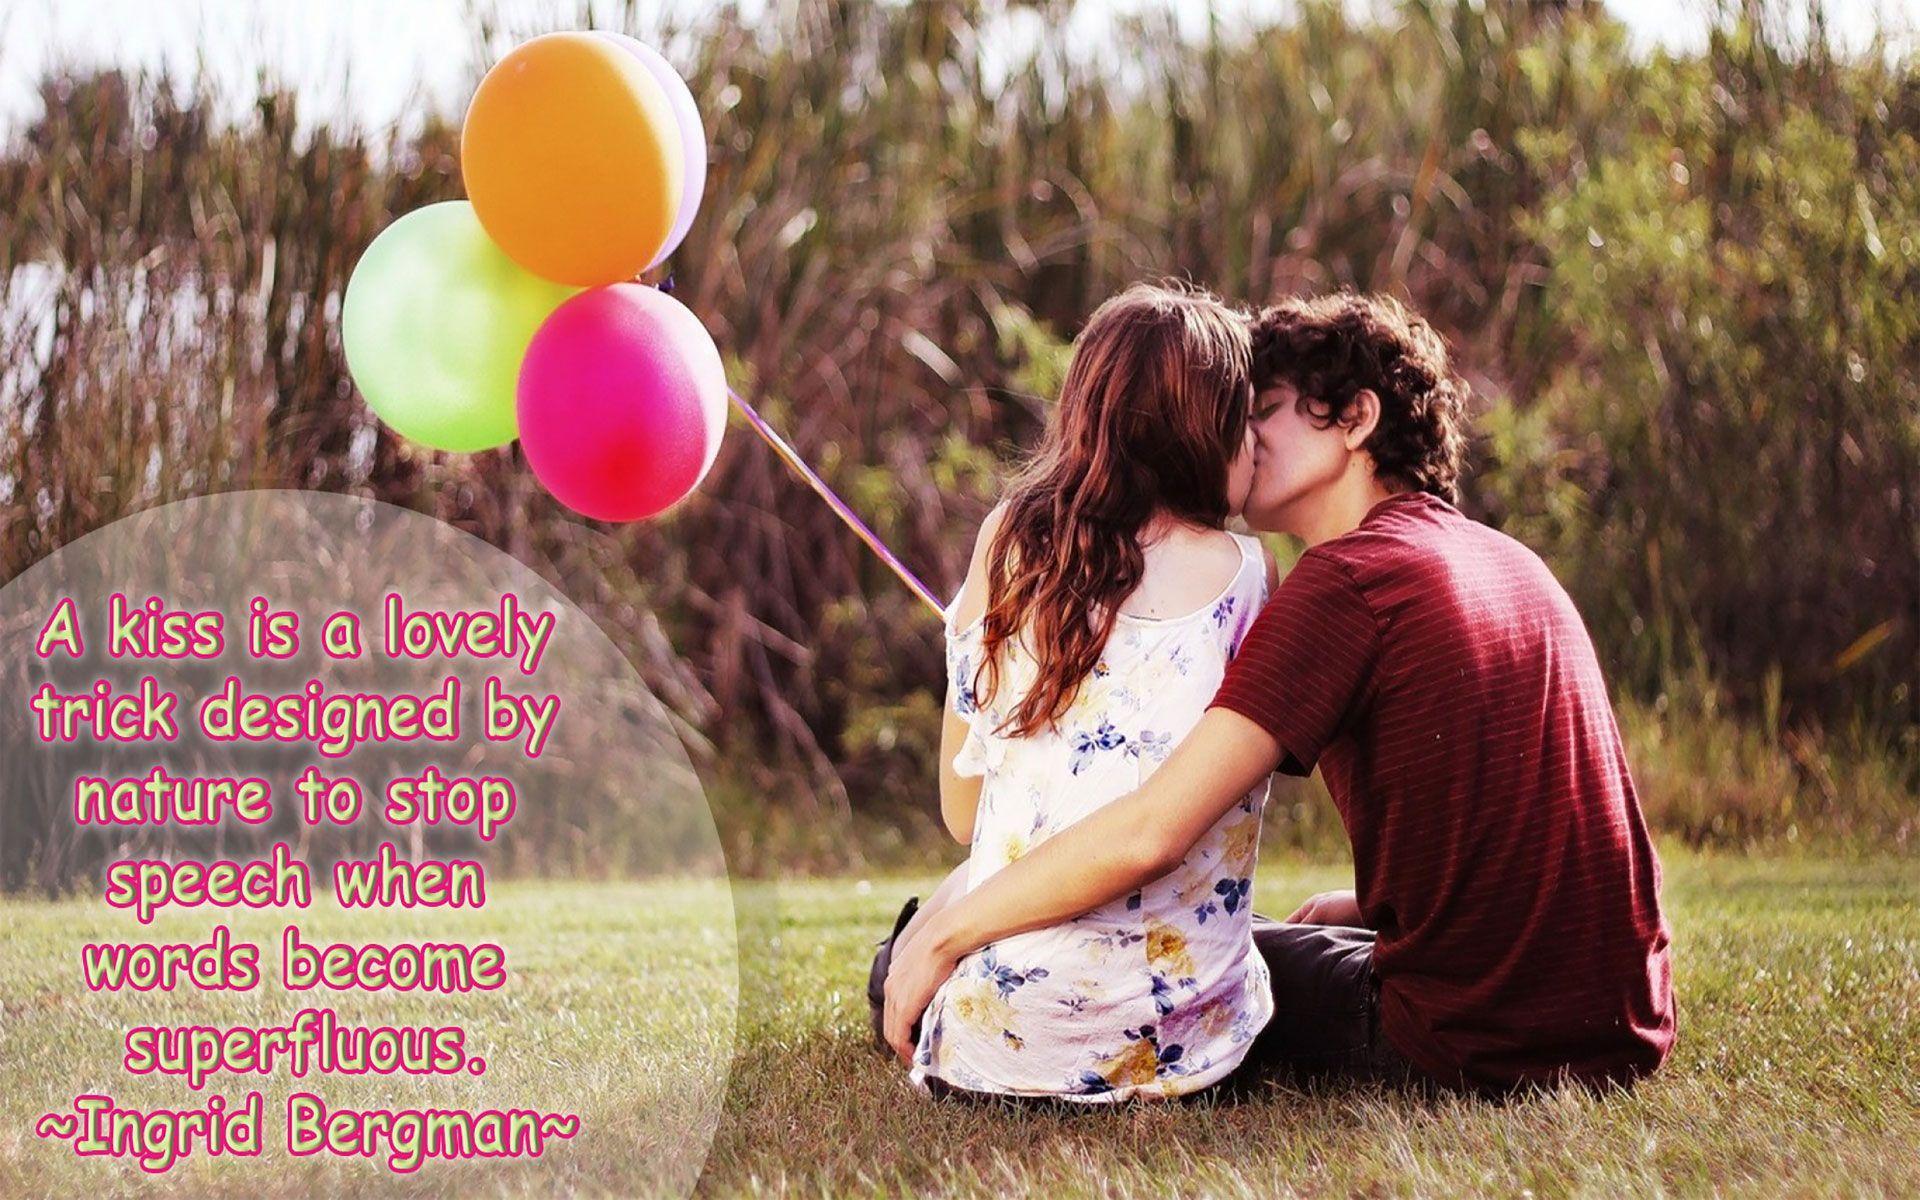 Famous Love Quotes Image. cute love quotes for her and Him. Cute